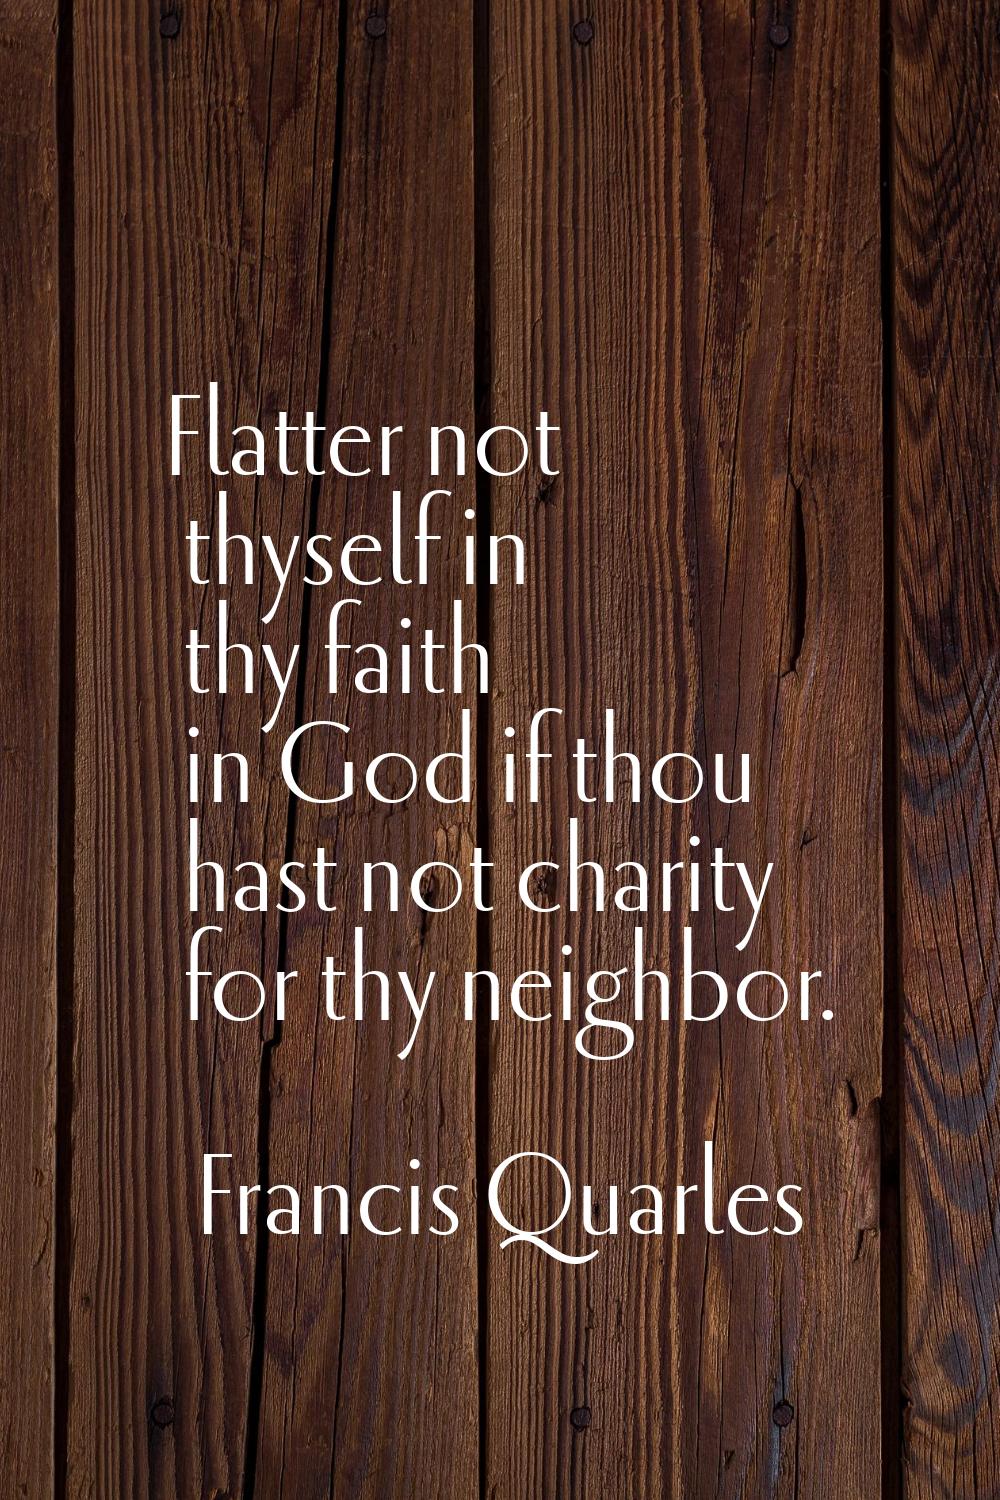 Flatter not thyself in thy faith in God if thou hast not charity for thy neighbor.